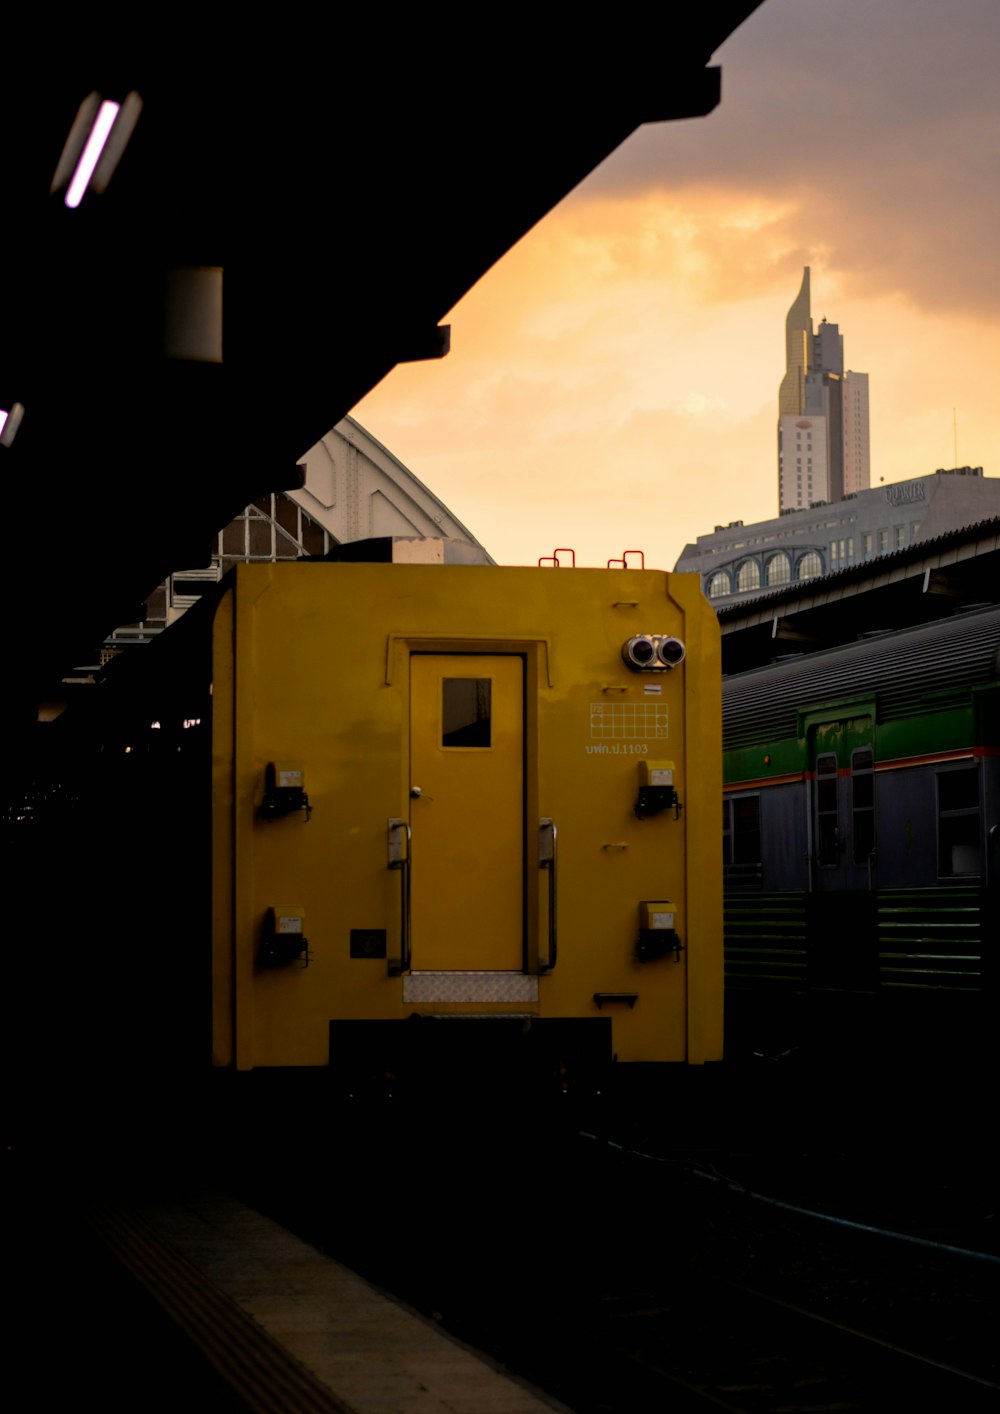 a yellow box sitting on the side of a train track